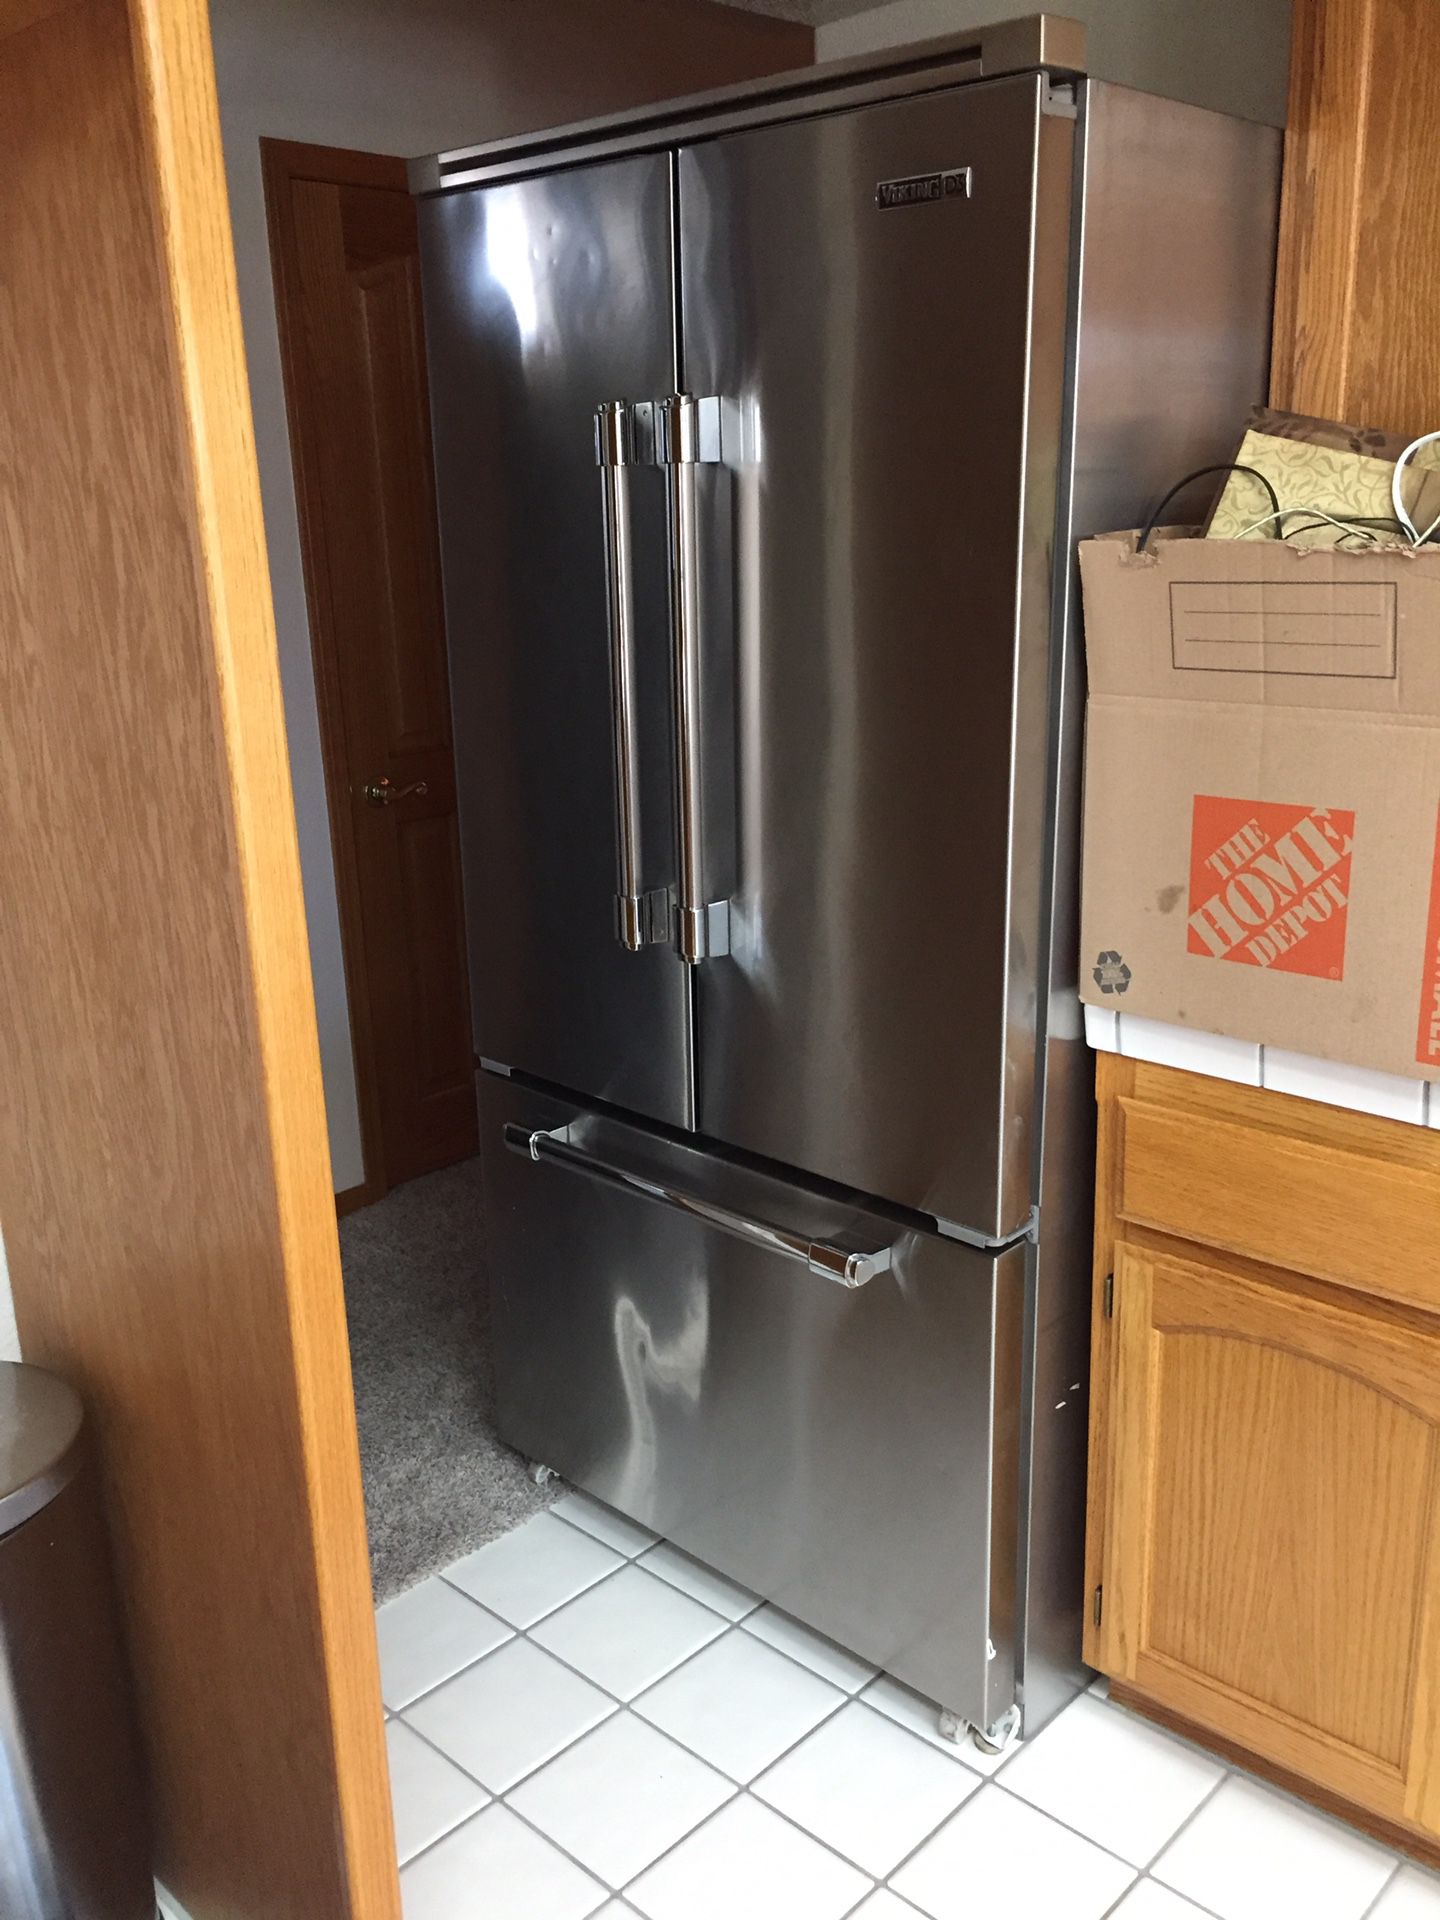 VIKING 36” STAINLESS STEEL COUNTER DEPTH FRENCH DOOR REFRIGERATOR FOR SALE NEED GONE ASAP!!